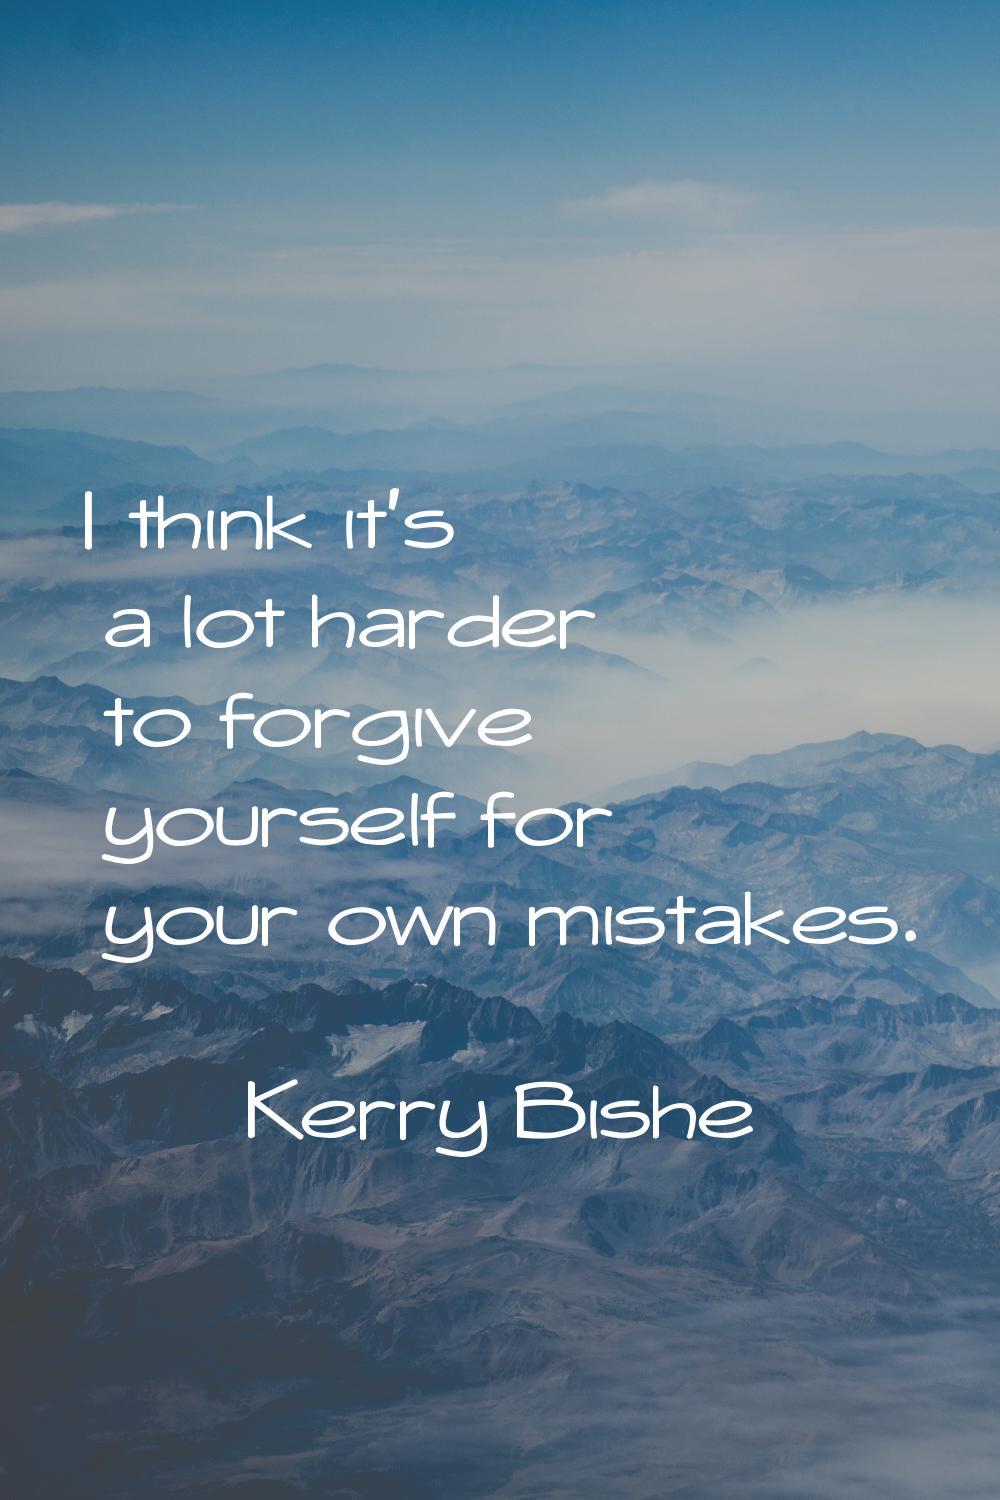 I think it's a lot harder to forgive yourself for your own mistakes.